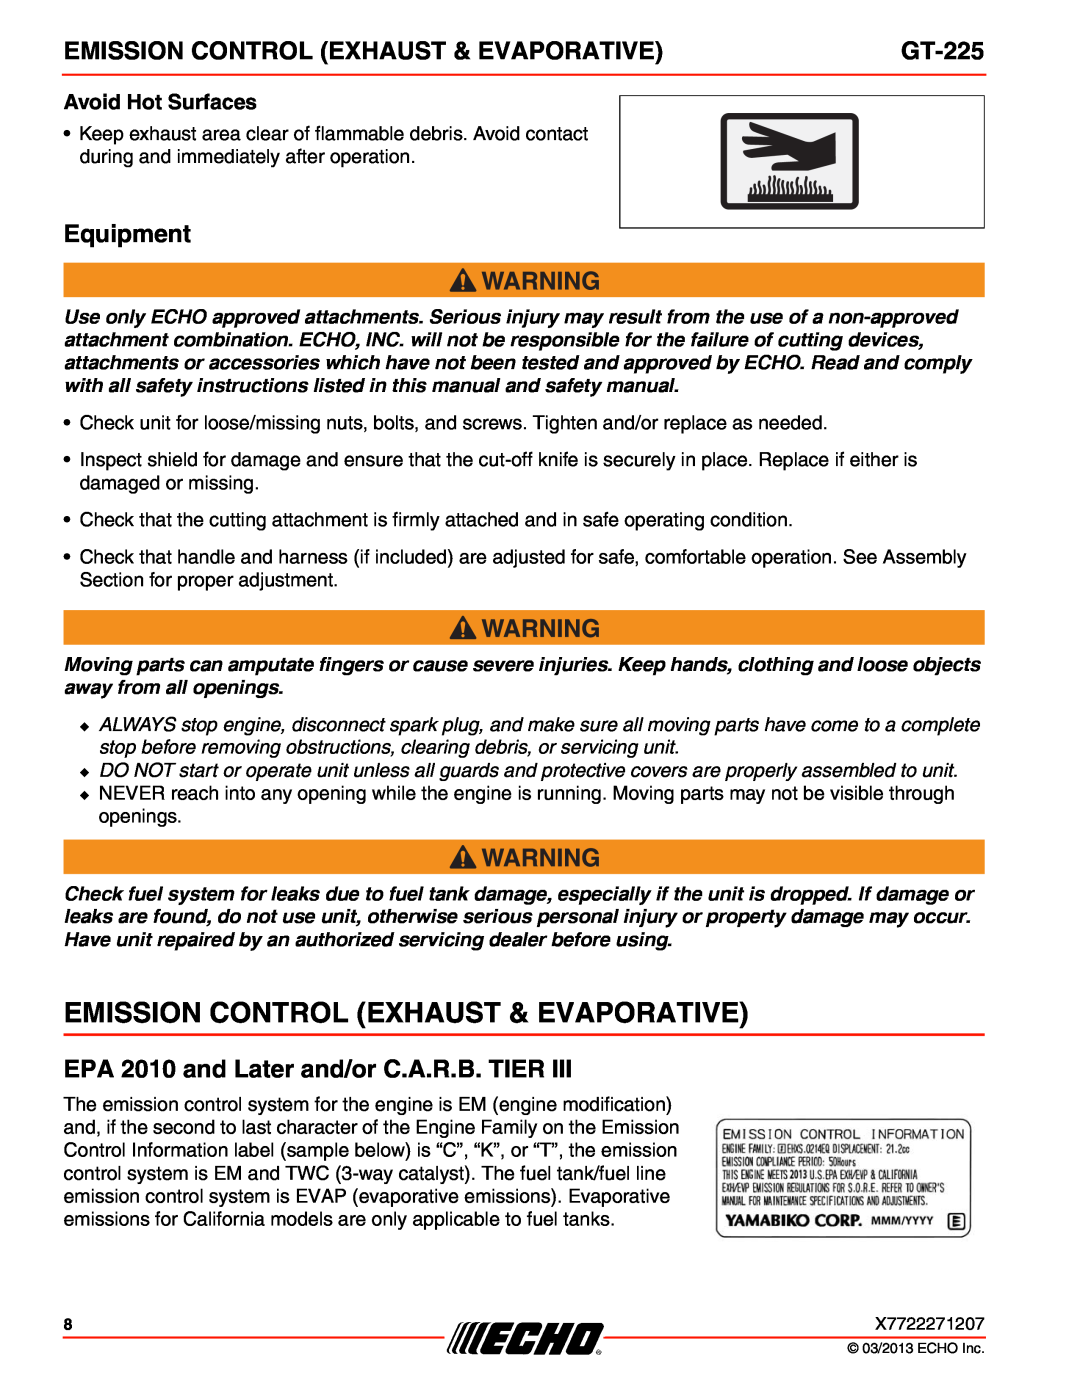 Echo GT-225 Emission Control Exhaust & Evaporative, Equipment, EPA 2010 and Later and/or C.A.R.B. TIER, Avoid Hot Surfaces 